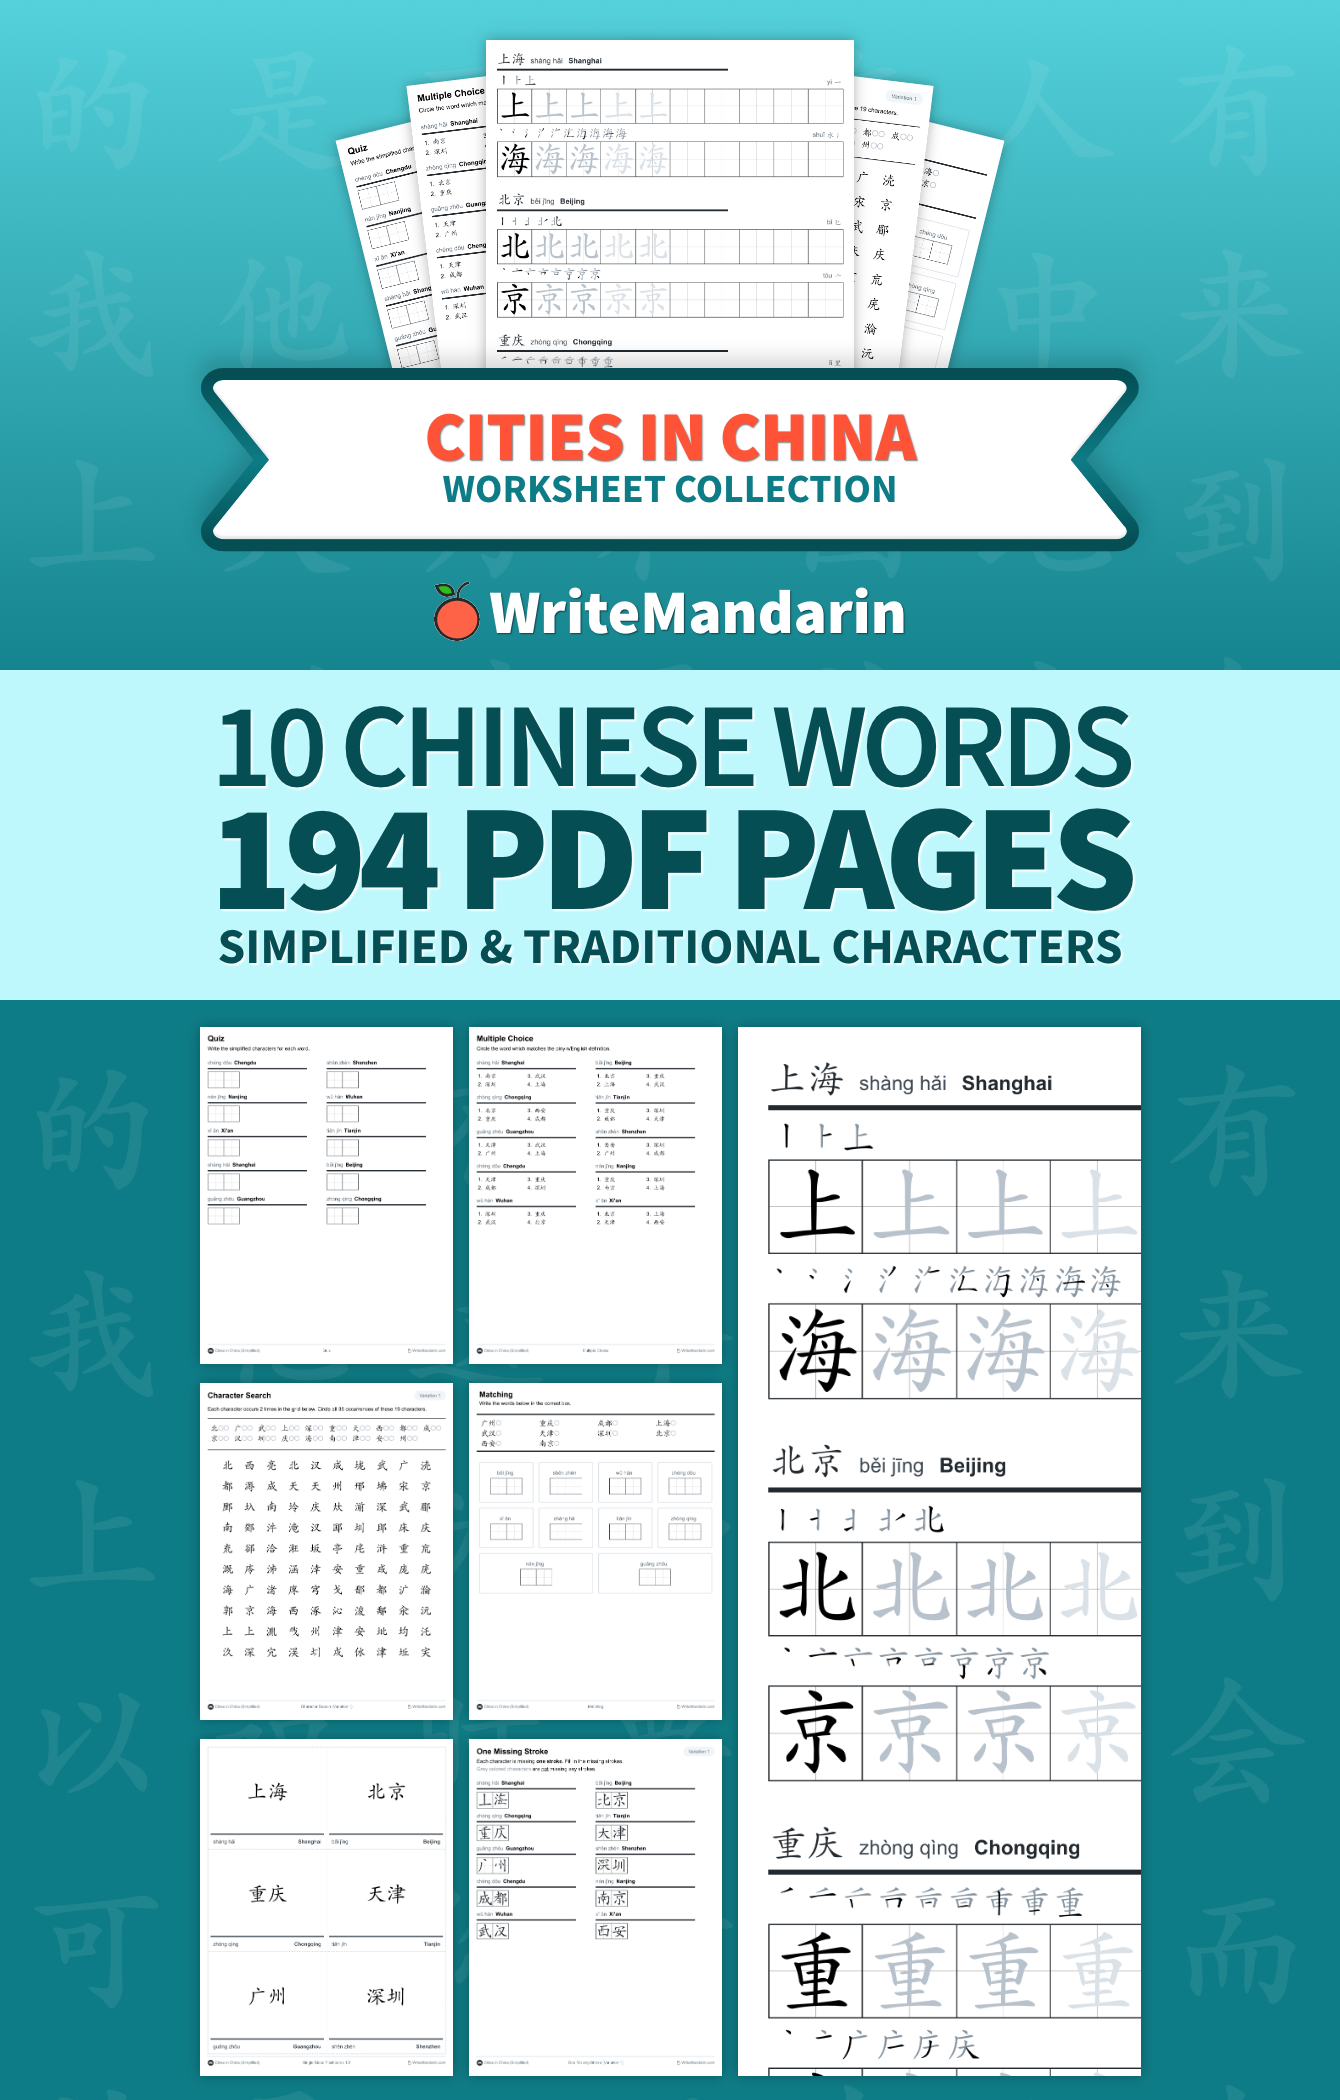 Preview image of Cities in China worksheet collection